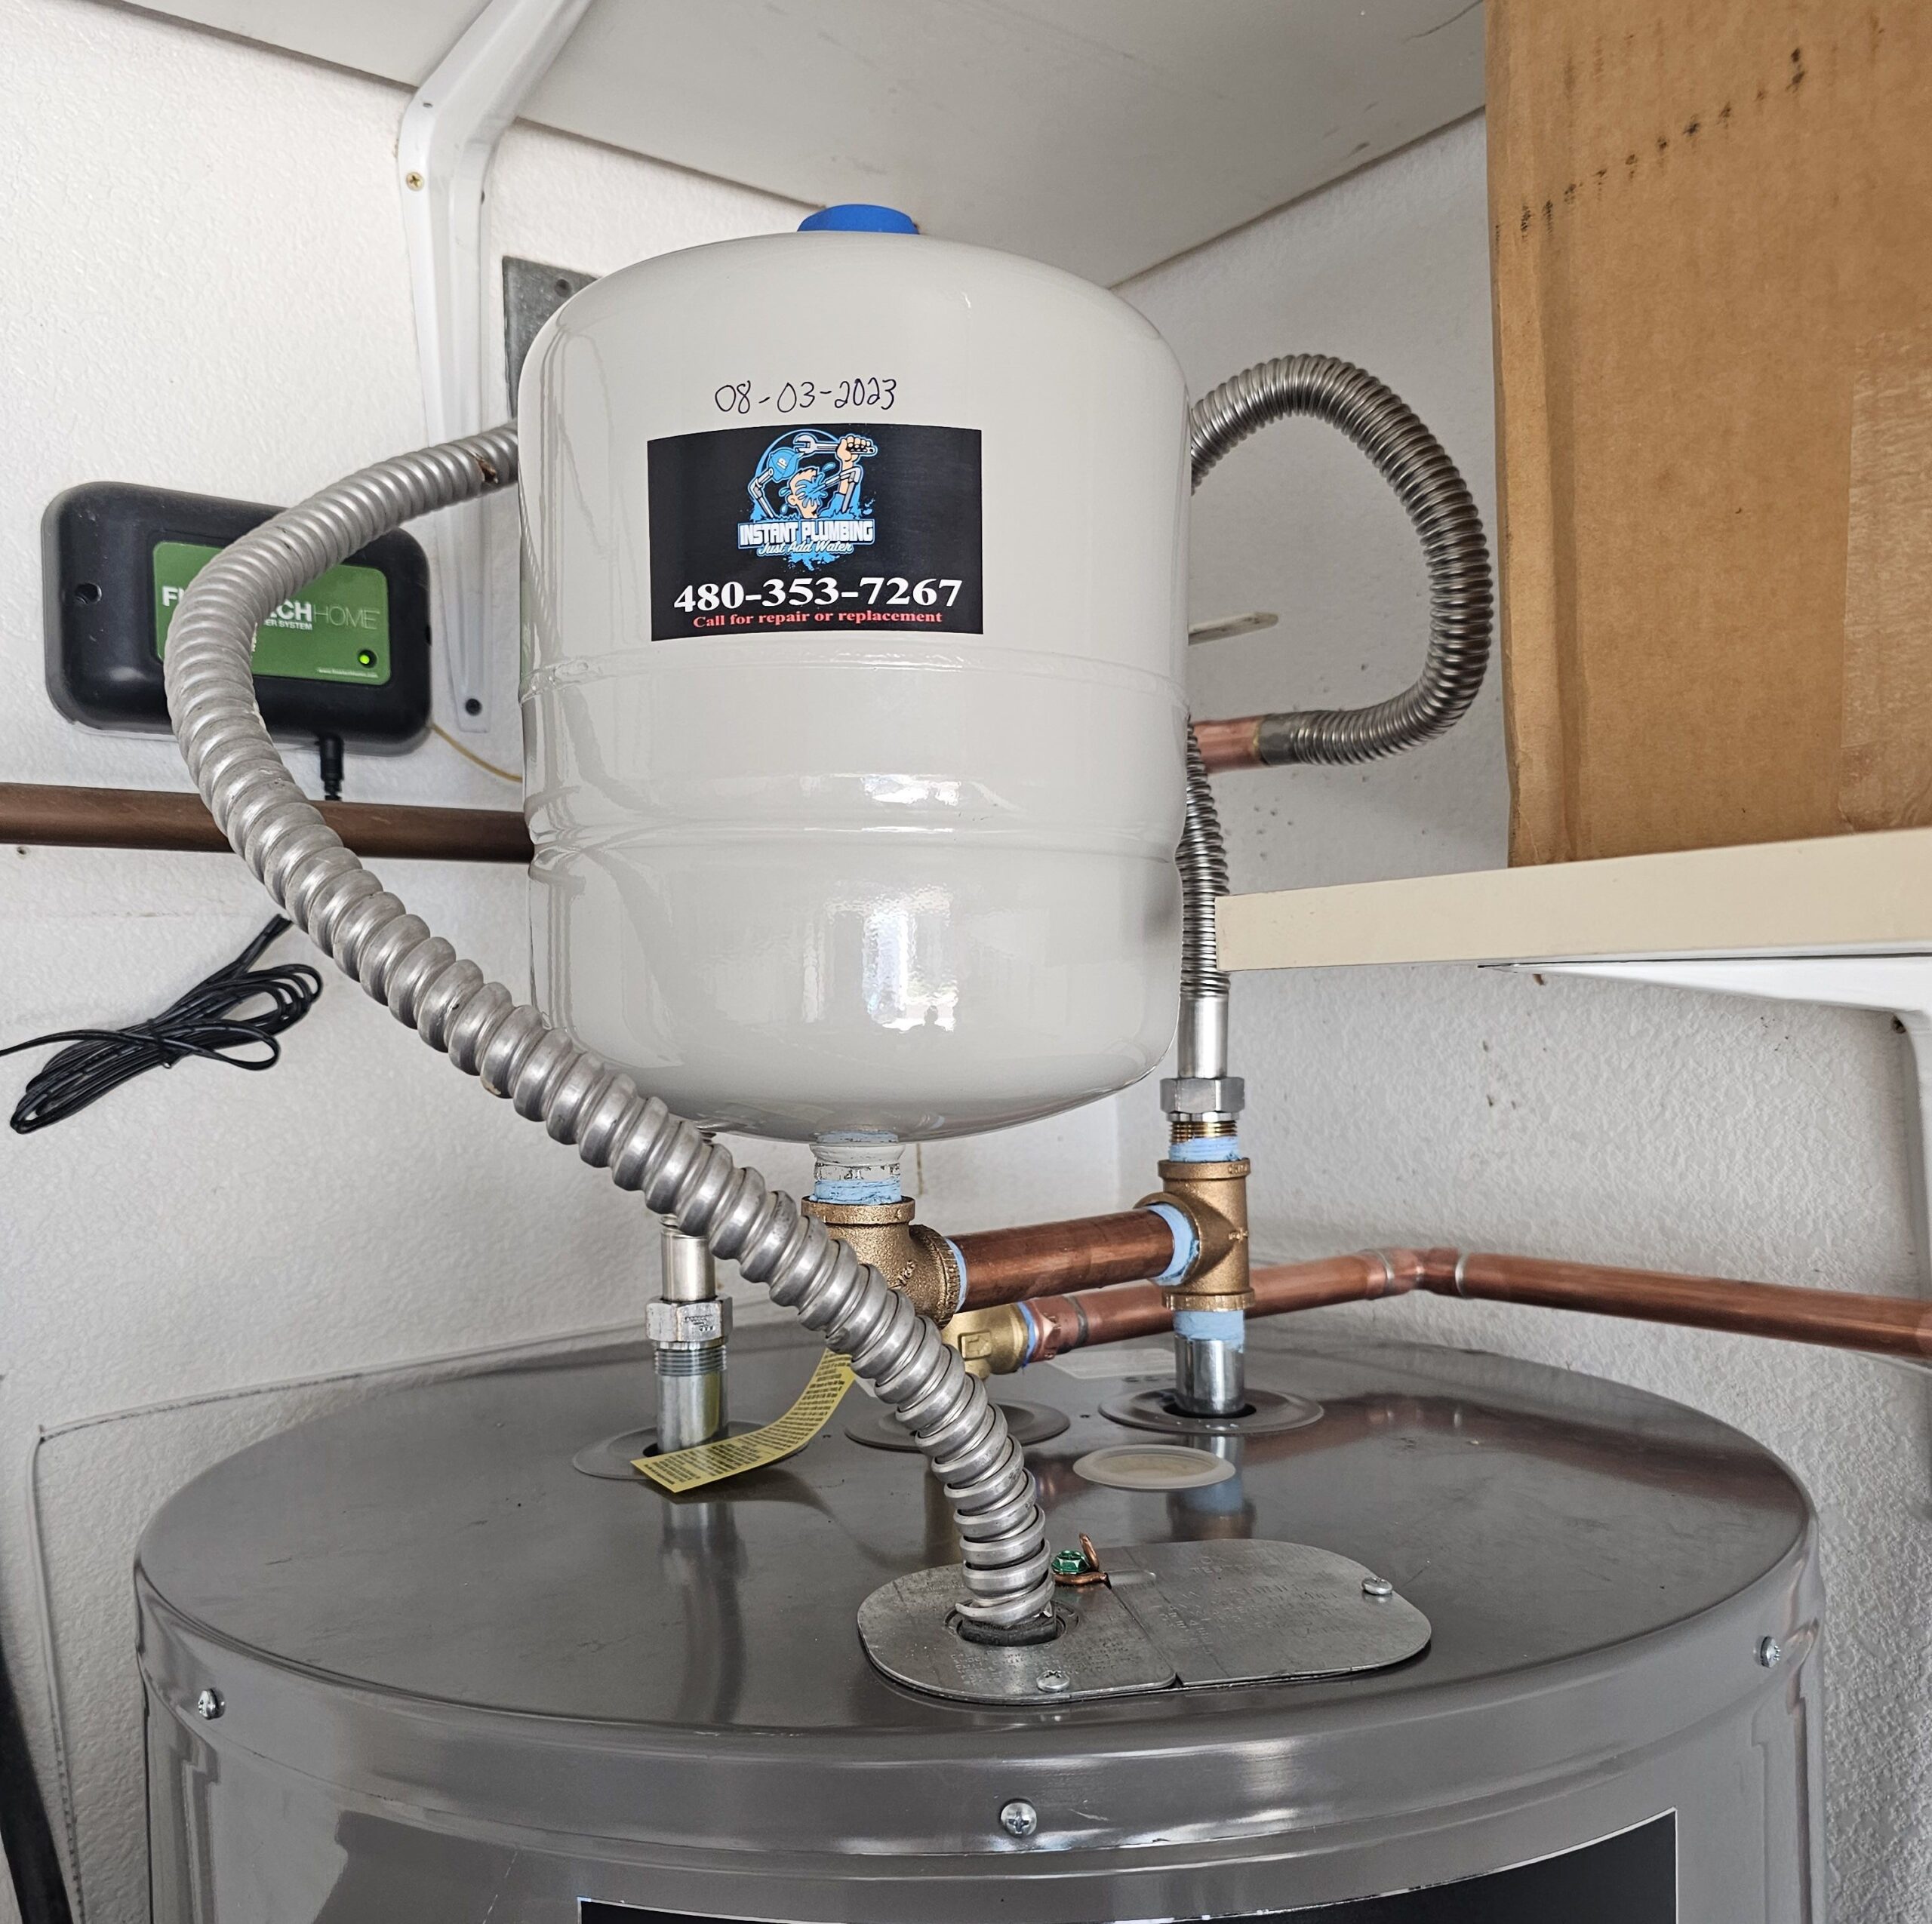 Every Water Heater Installed Includes an Expansion Tank, Why?